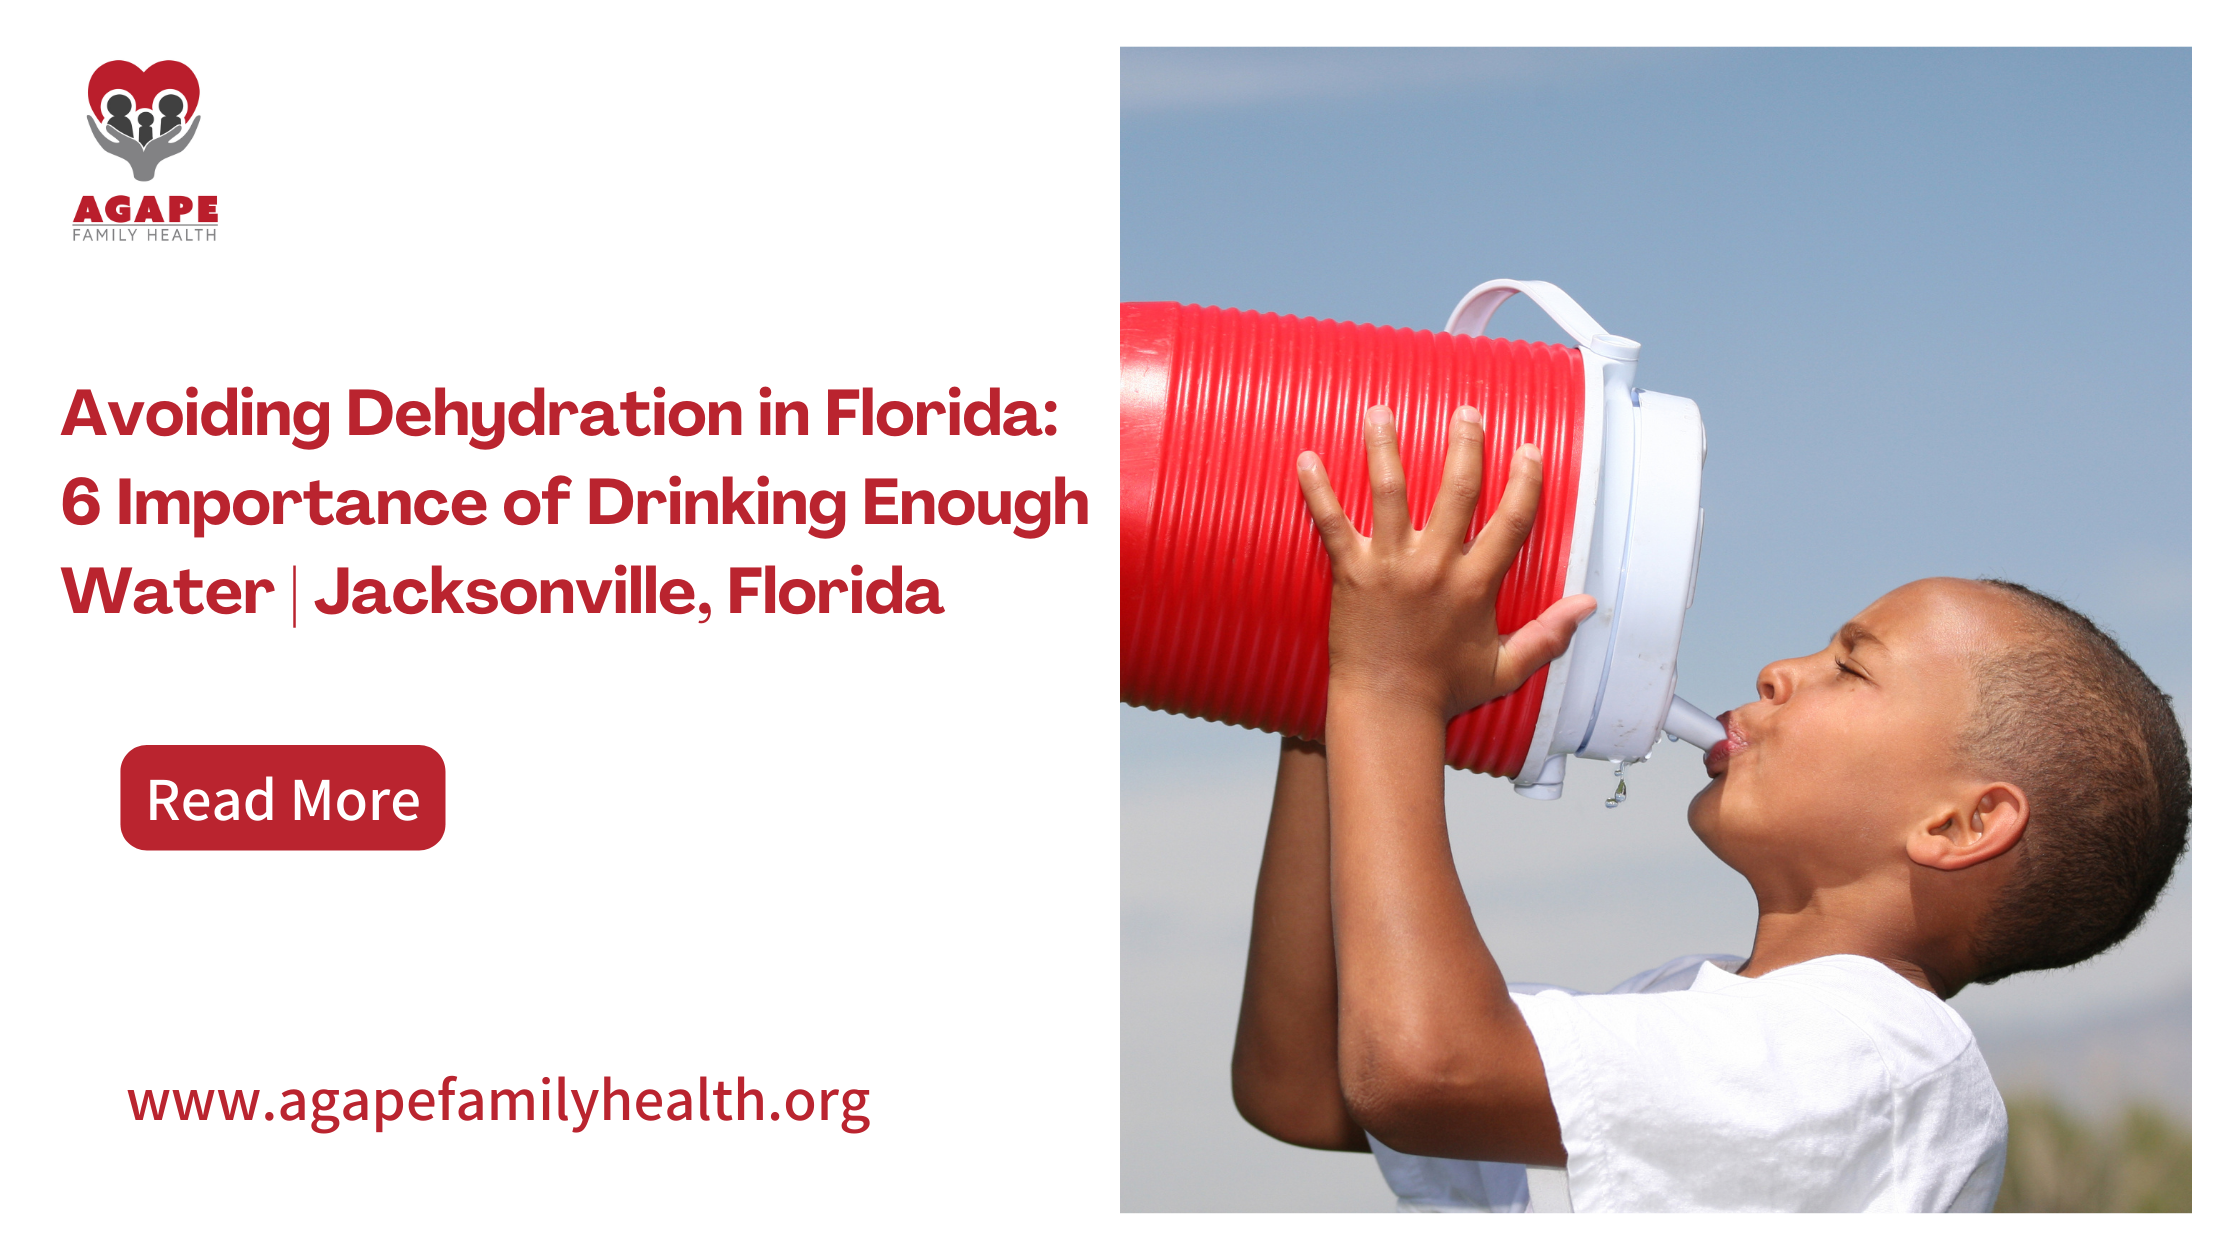 Florida is a beautiful state known for its sunny beaches and warm weather. However, with its high temperatures and humidity, it is important to stay hydrated. Dehydration occurs when the body loses more fluids than it takes in. It can lead to various symptoms, including headaches, dizziness, fatigue, and even heatstroke.